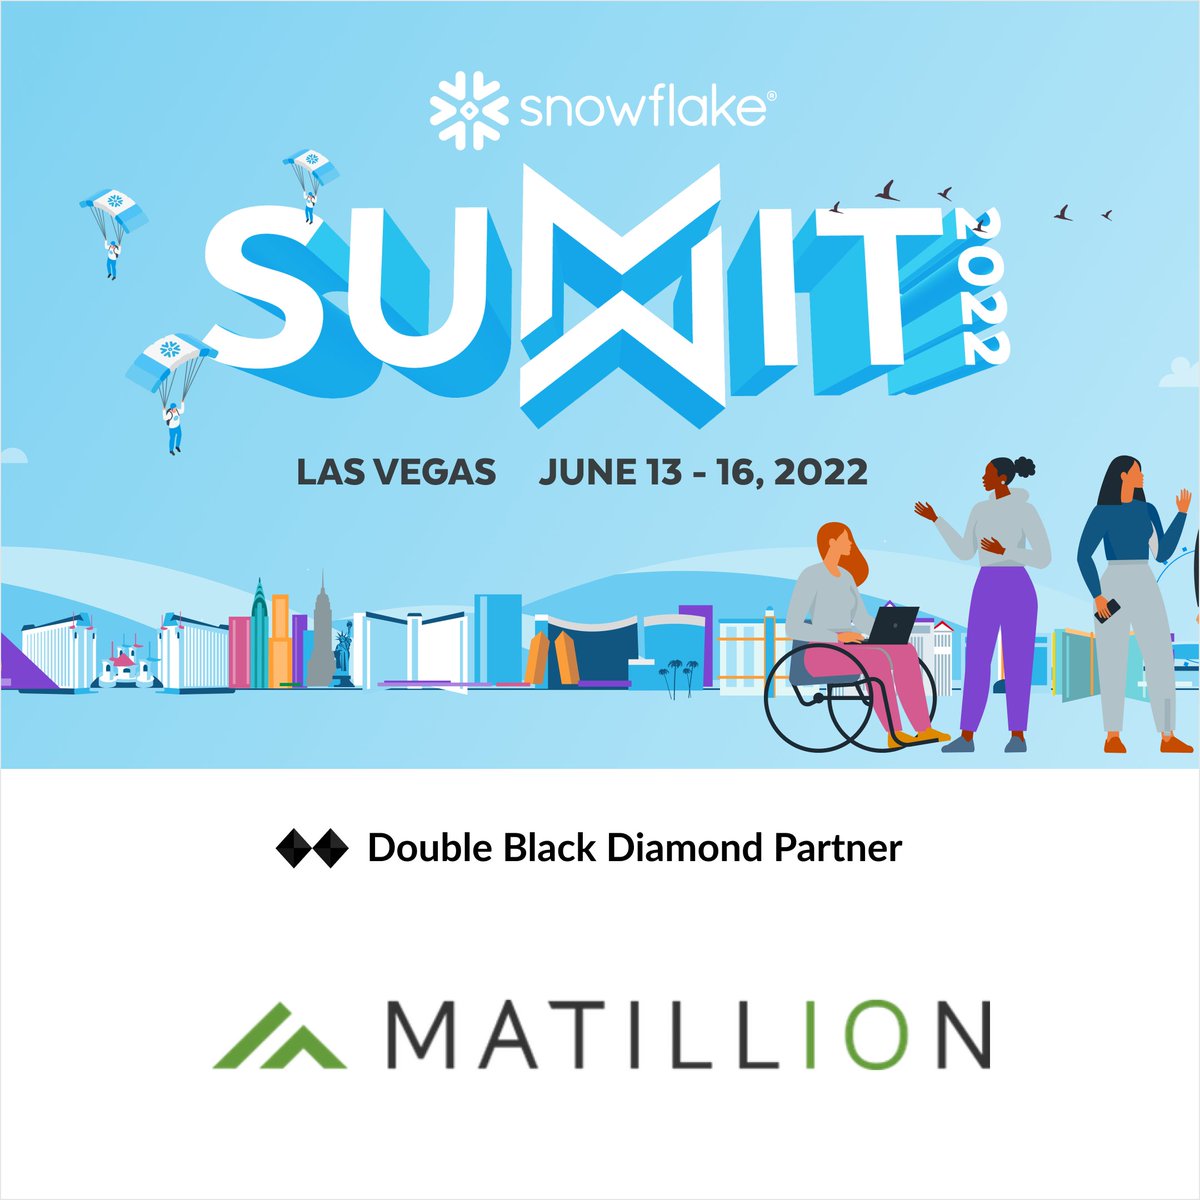 Shoutout to our Double Black Diamond partner, @matillion. We can’t wait to see you at #SnowflakeSummit!

https://t.co/5oBWVHPYYd https://t.co/XQjG5rgK2p